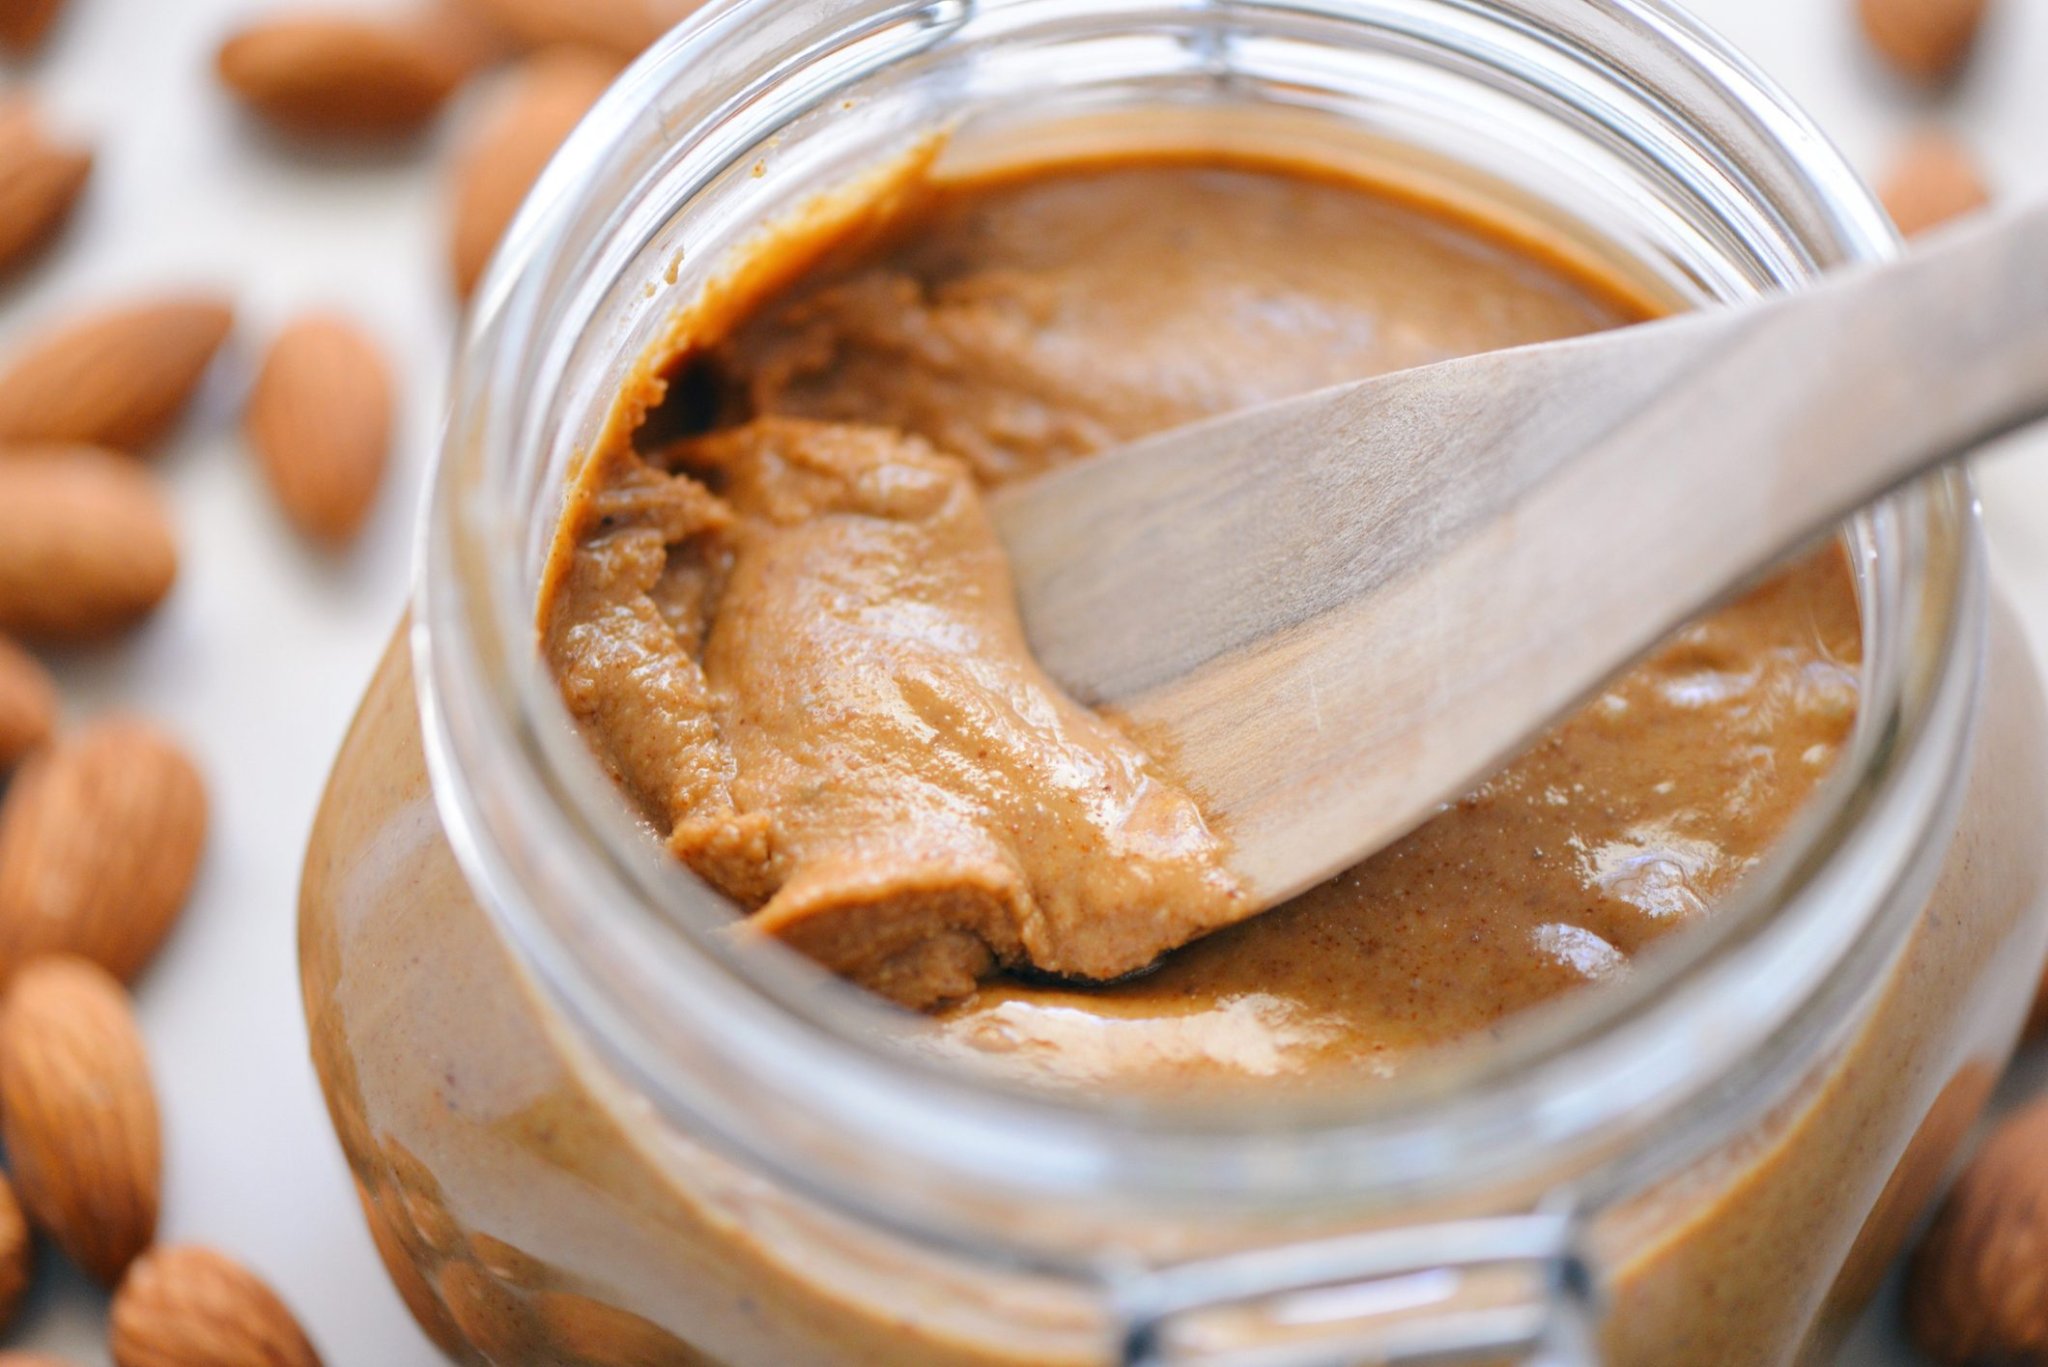 Is Almond Butter Healthy? 4 Things Nutritionists Want You to Know